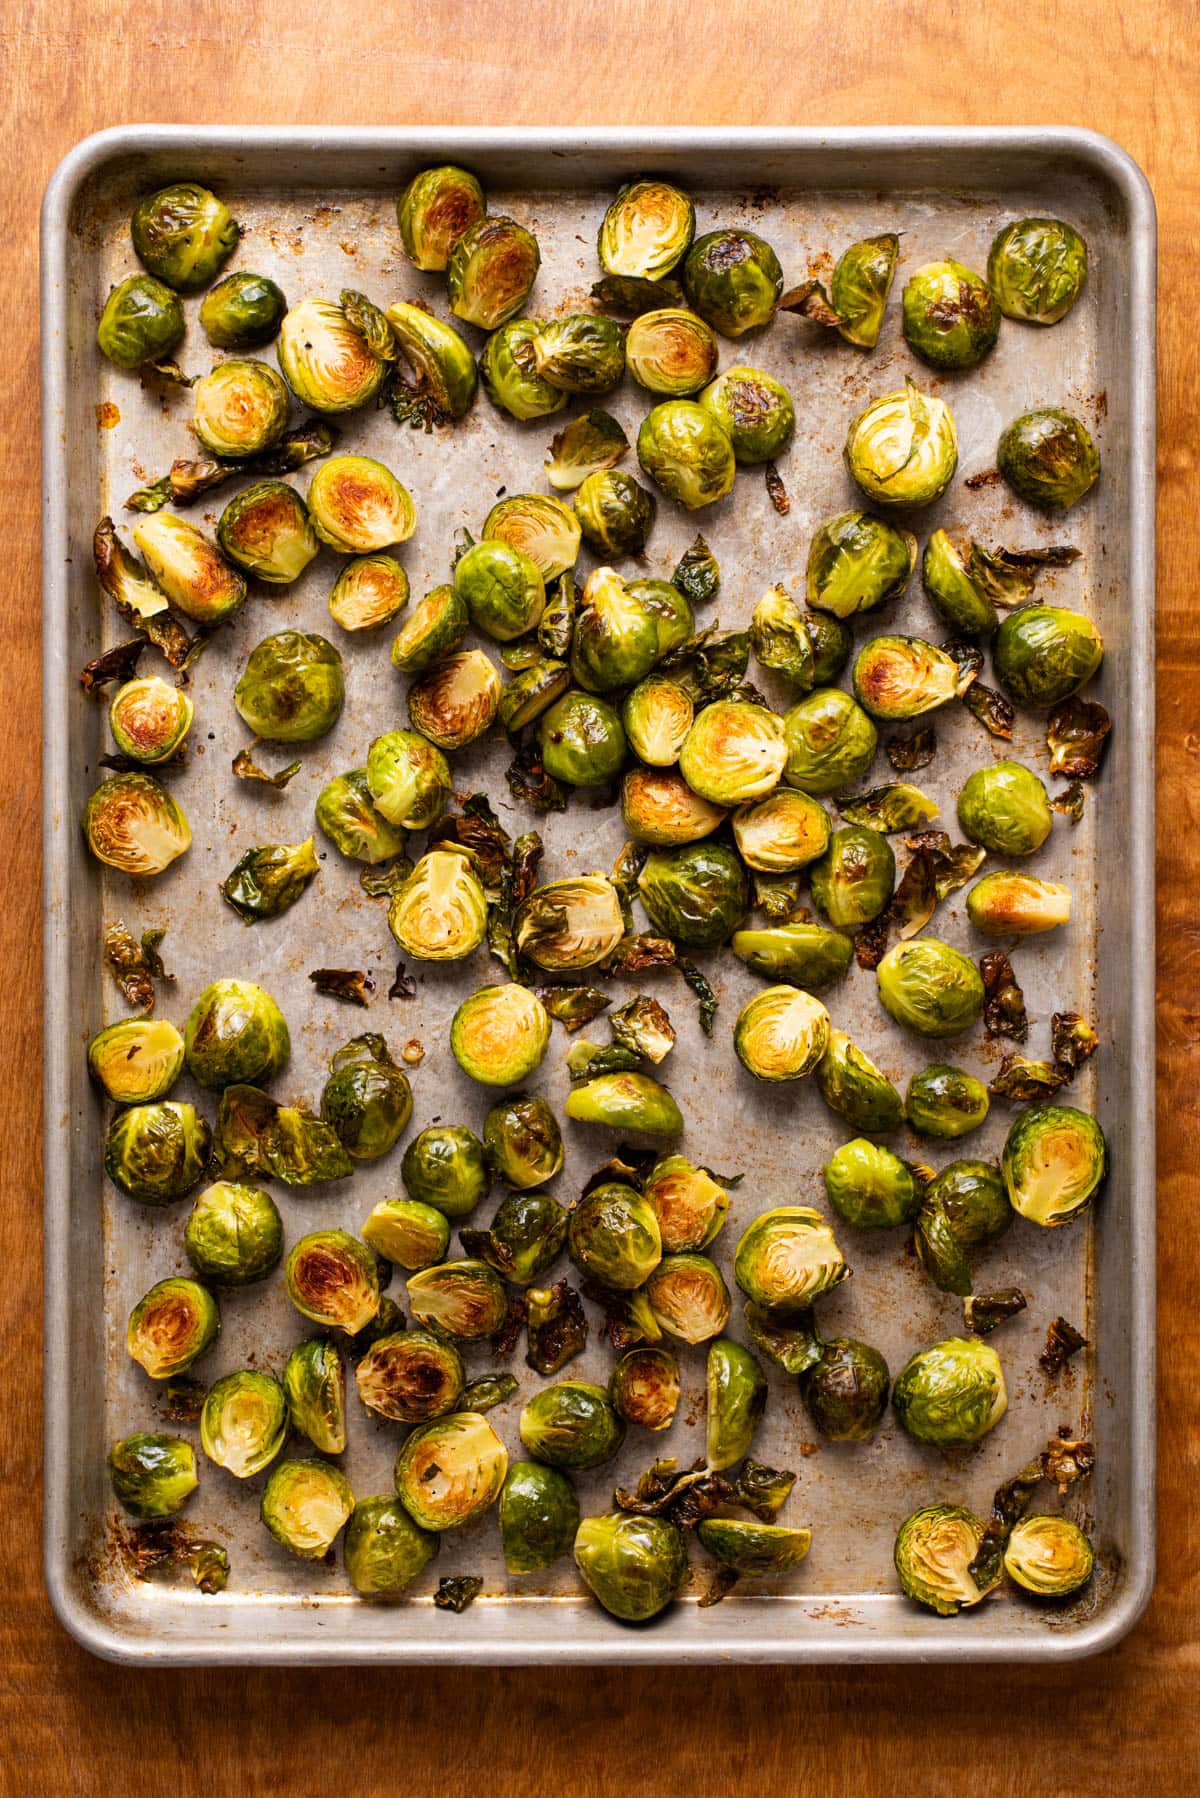 Charred Brussels sprouts on a baking sheet.